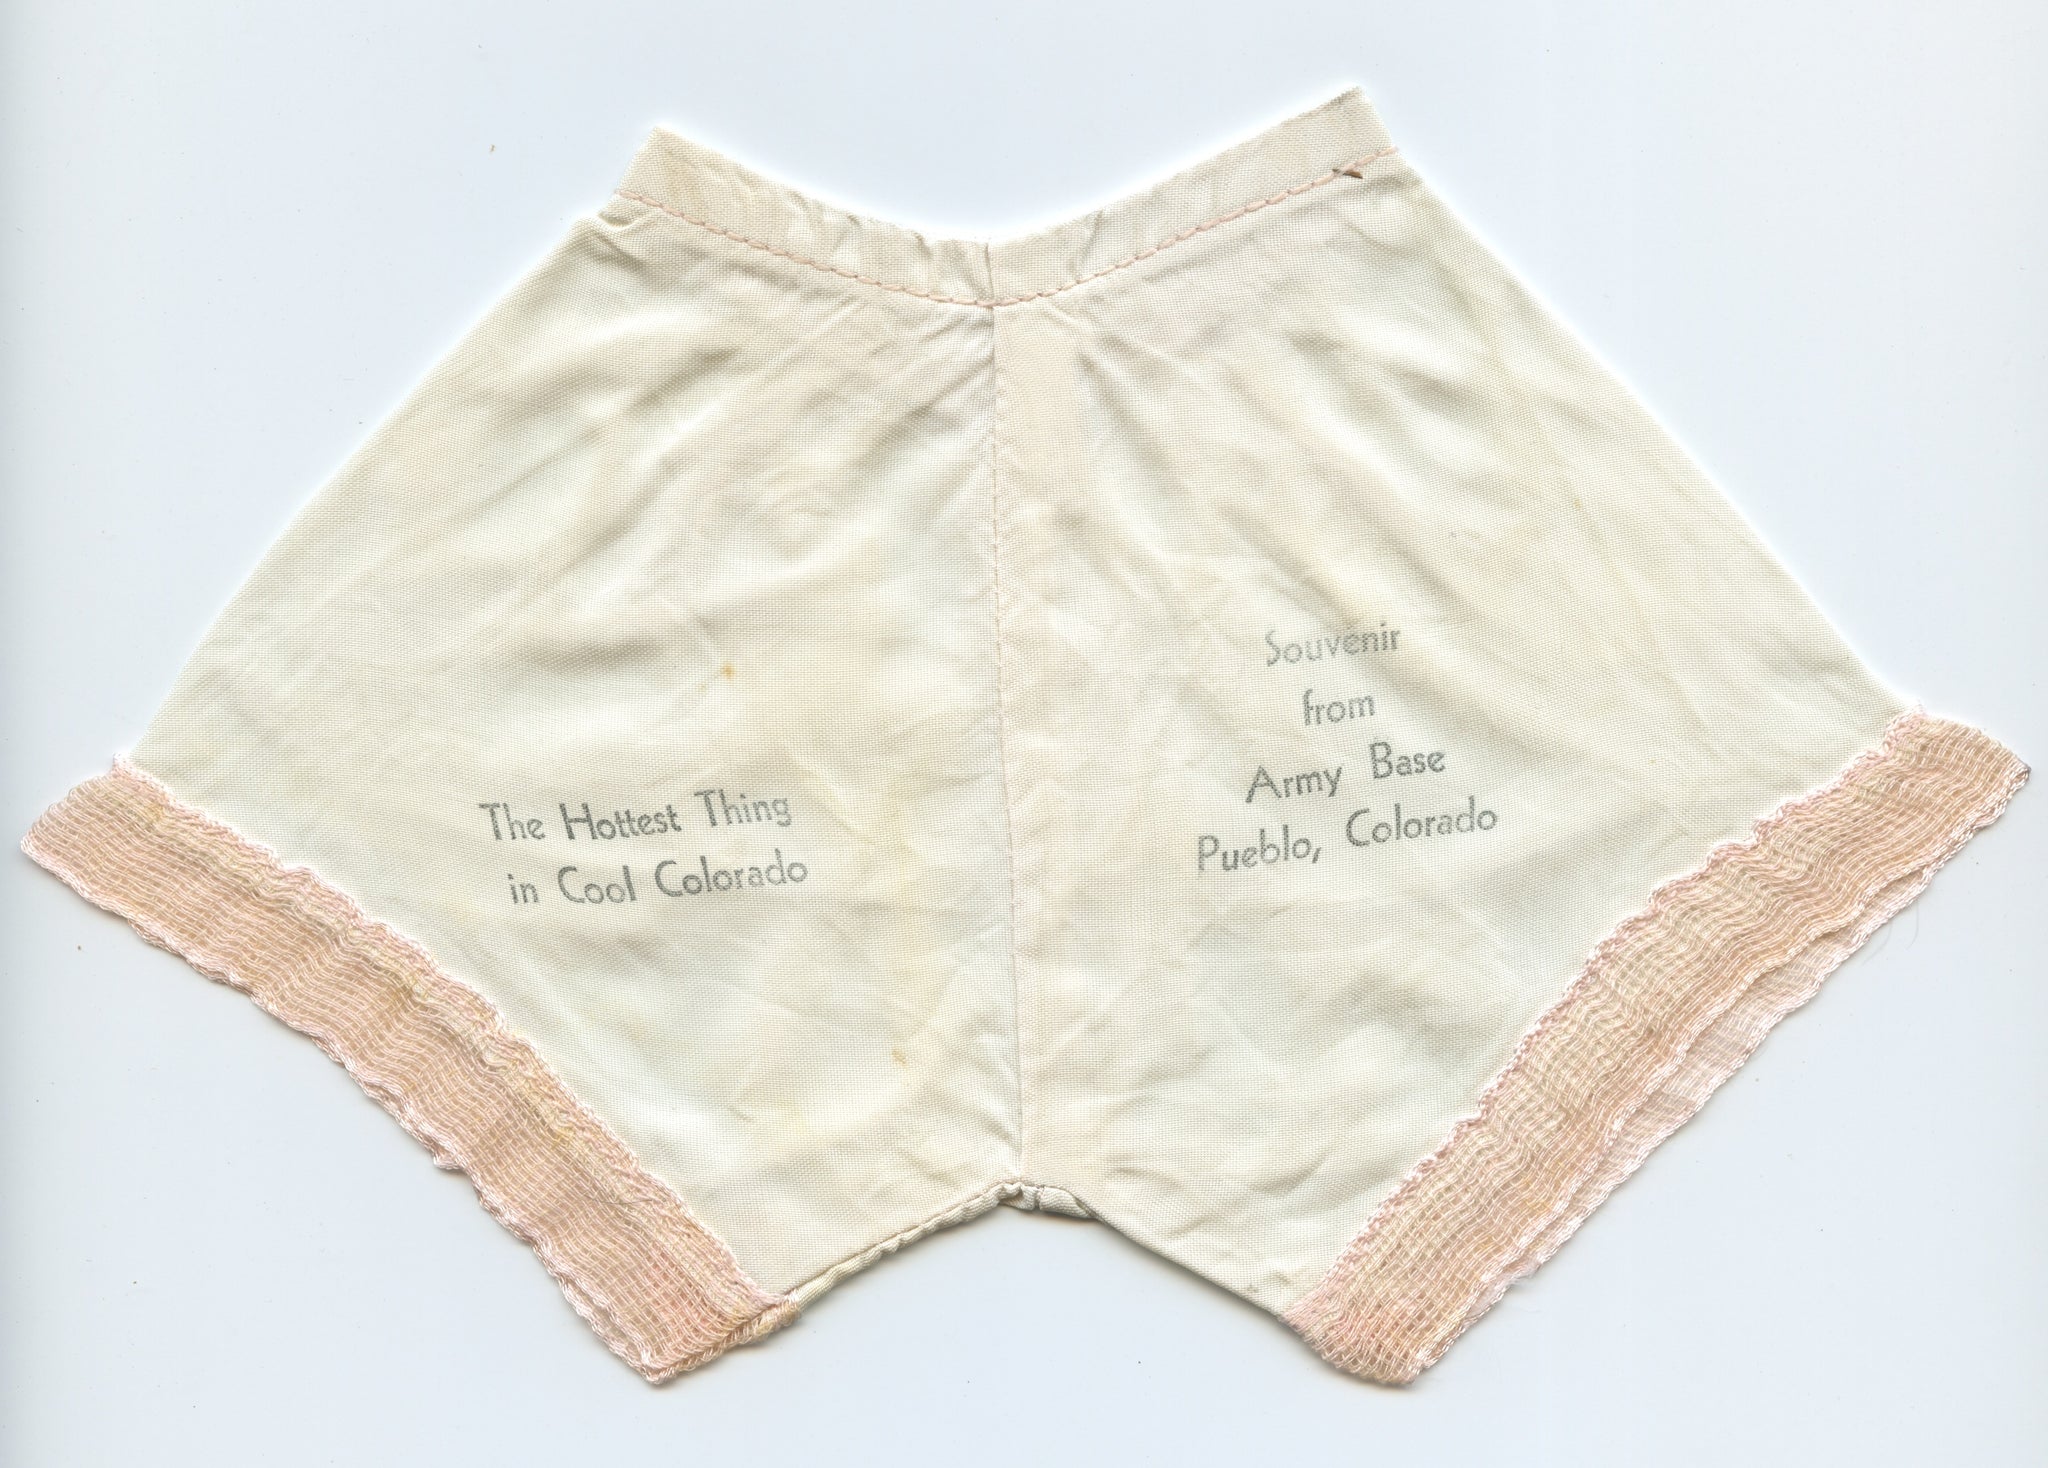 "The Hottest Thing in Cool Colorado" – Miniature Souvenir Bloomers, ca. 1942